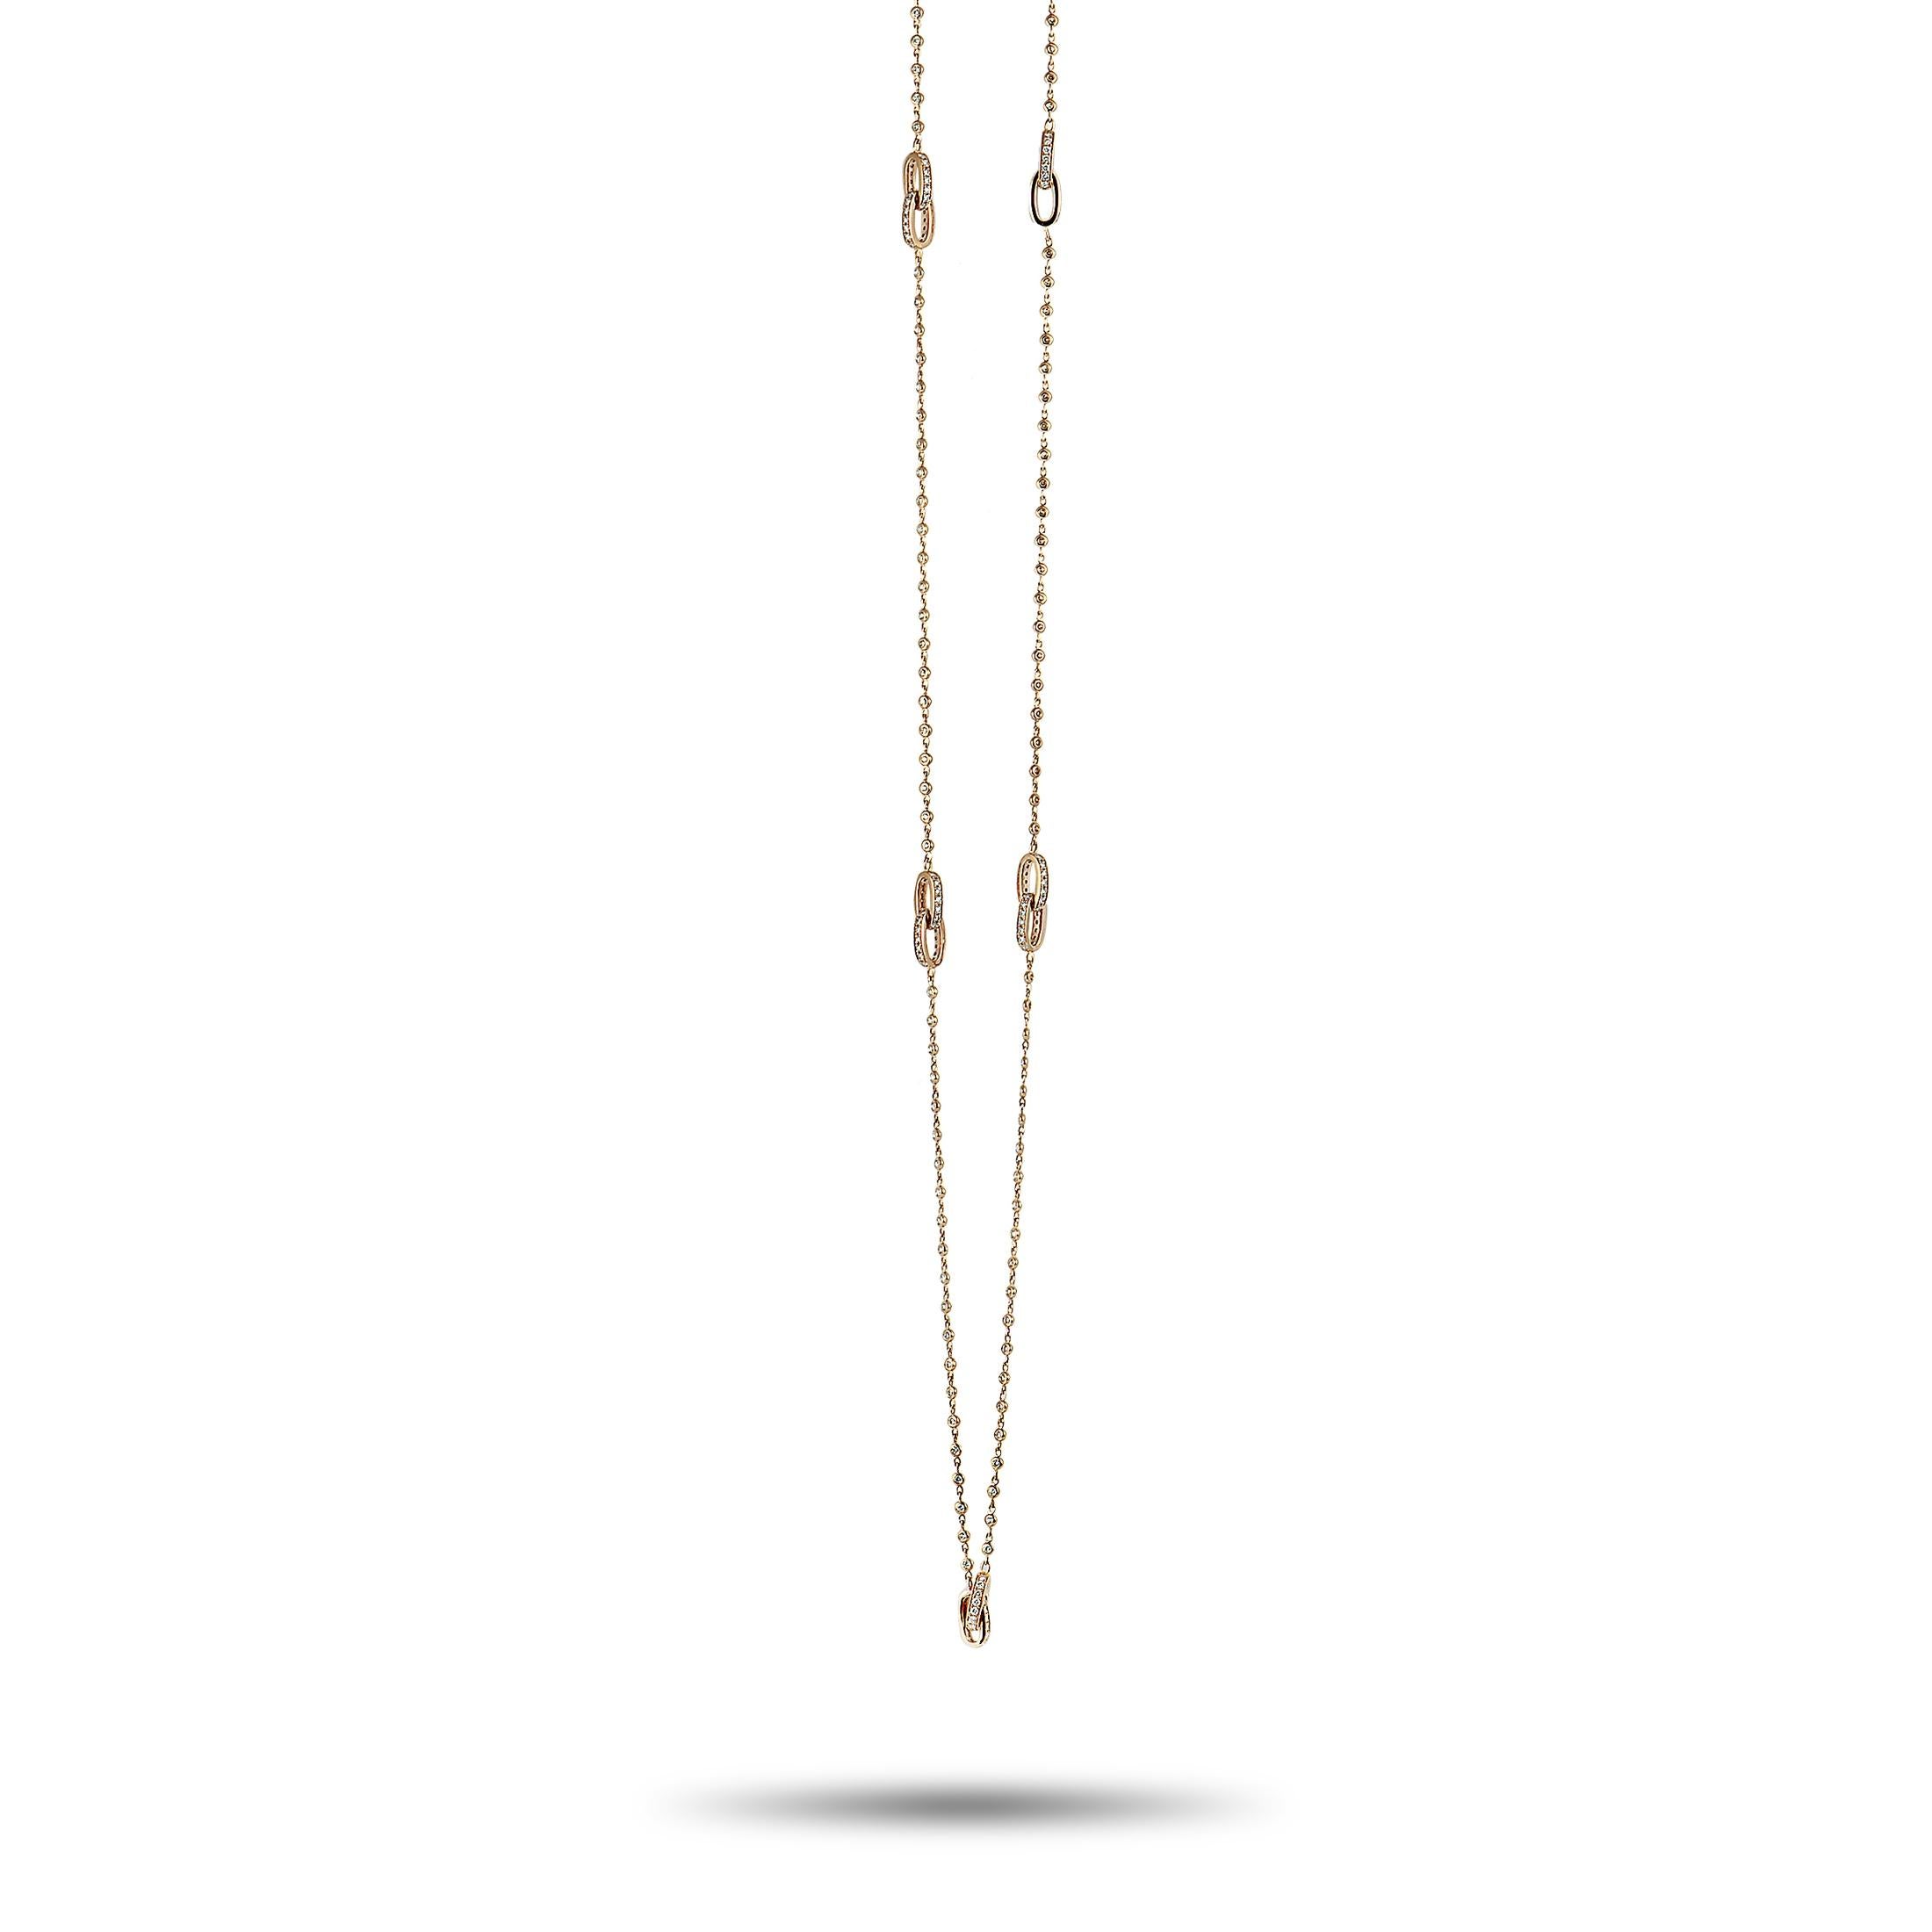 This LB Exclusive necklace is made of 18K rose gold and embellished with diamonds that total 3.90 carats. It weighs 18.3 grams and measures 30.00” in length, featuring lobster claw closure.

The necklace is offered in brand new condition and